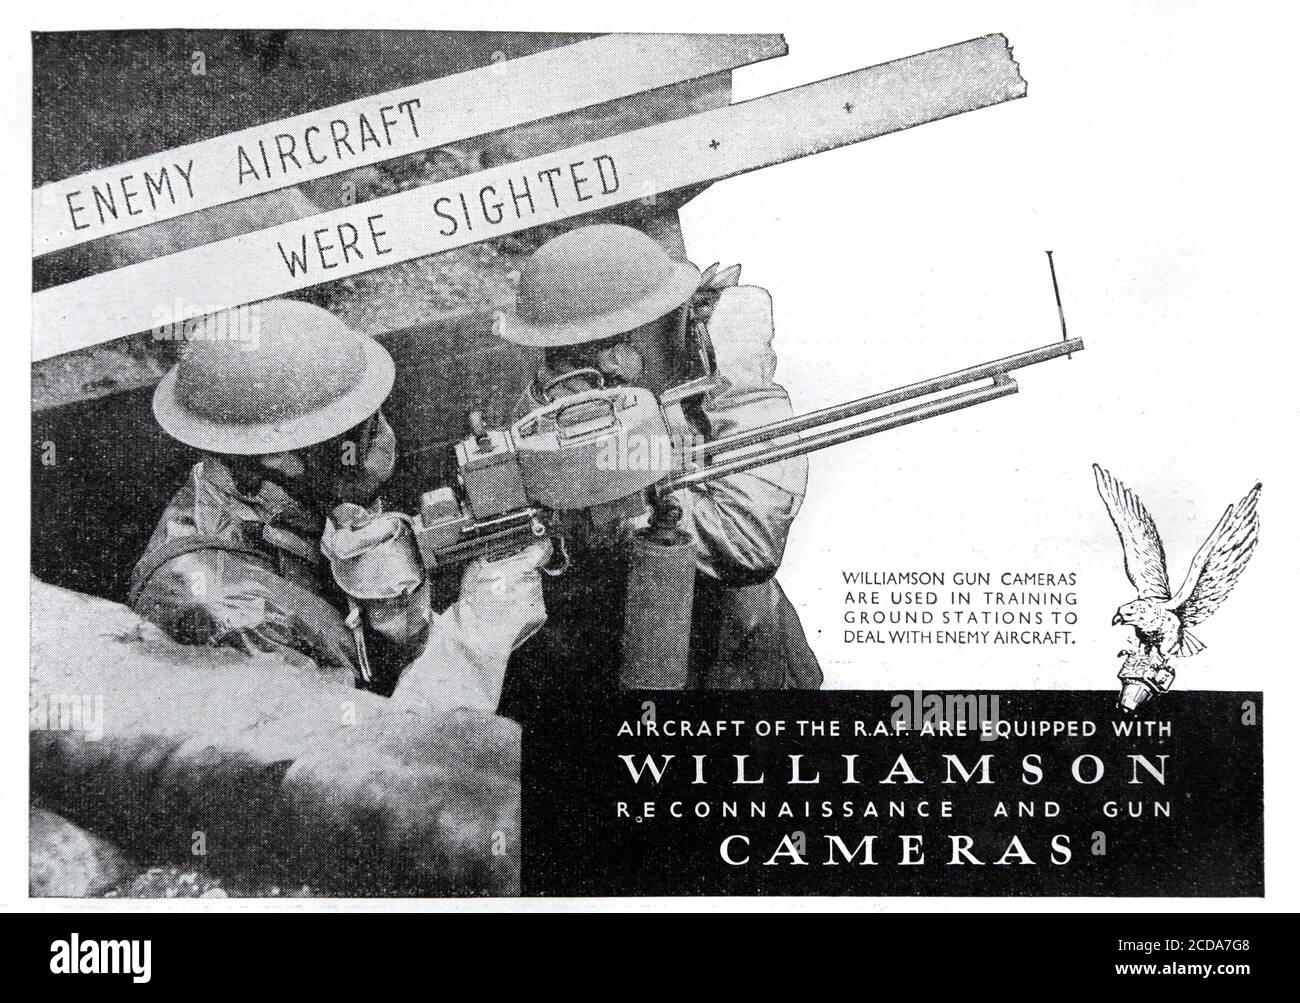 Vintage advert for British Williamson reconnaissance and gun cameras as used by the RAF in World War 2. Stock Photo